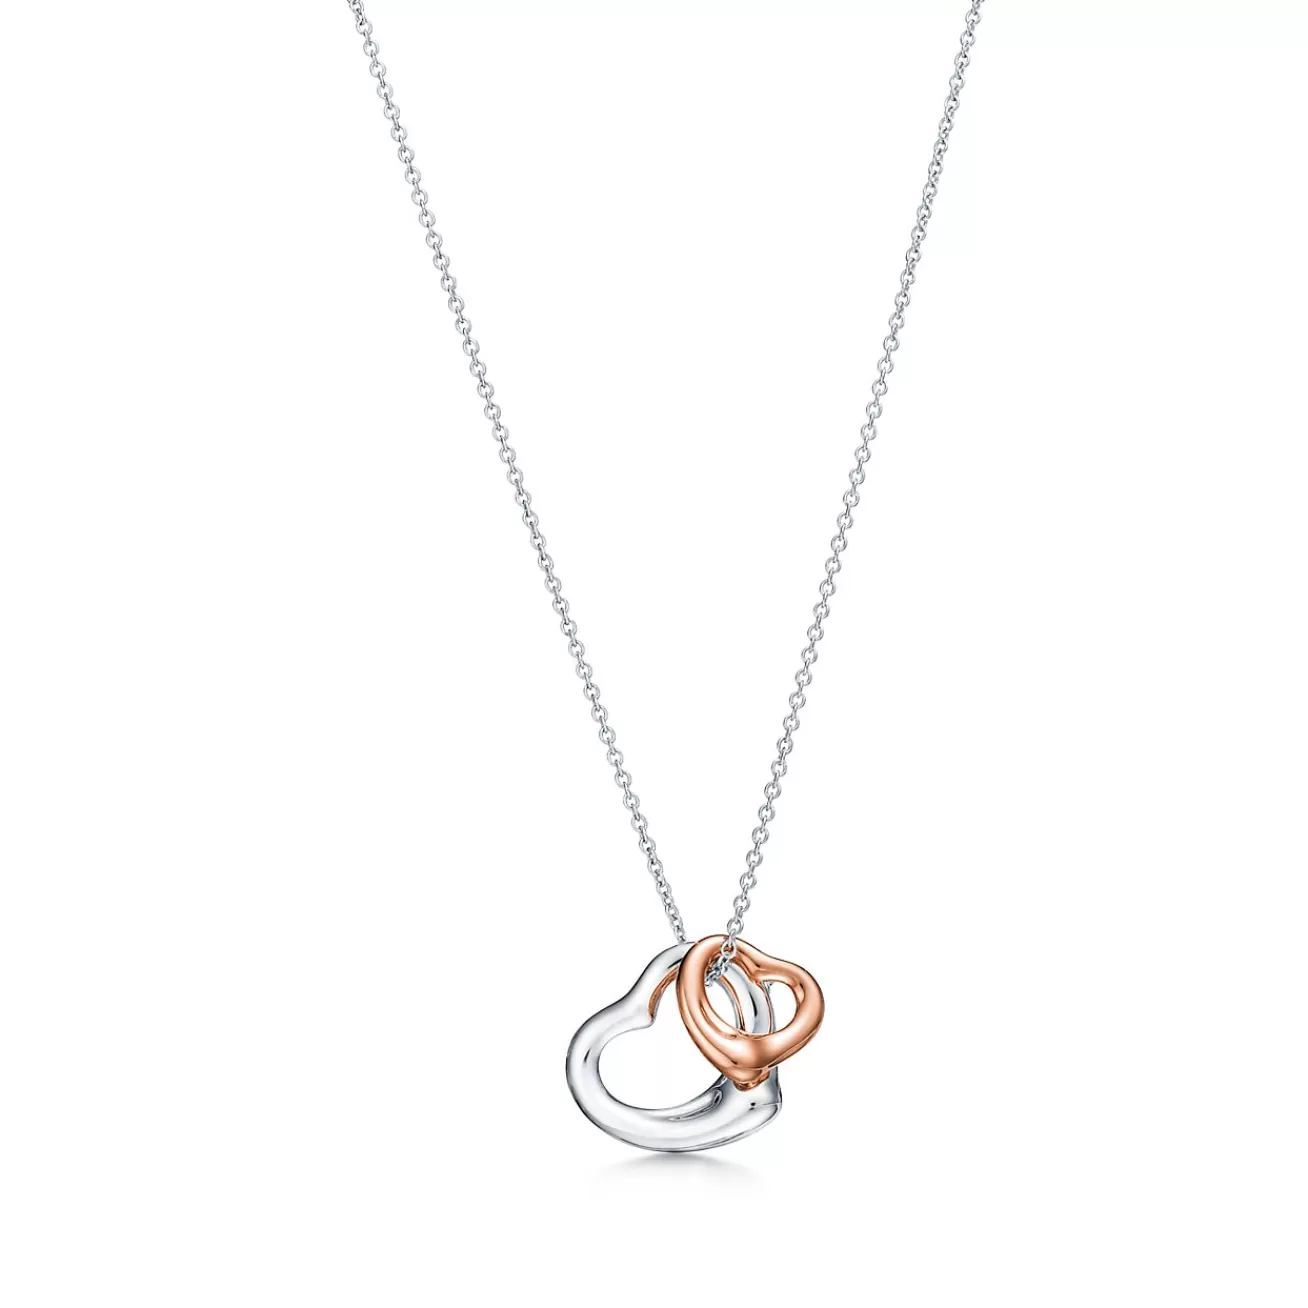 Tiffany & Co. Elsa Peretti® Open Heart pendant in sterling silver and 18k rose gold. | ^ Necklaces & Pendants | Gifts for Her